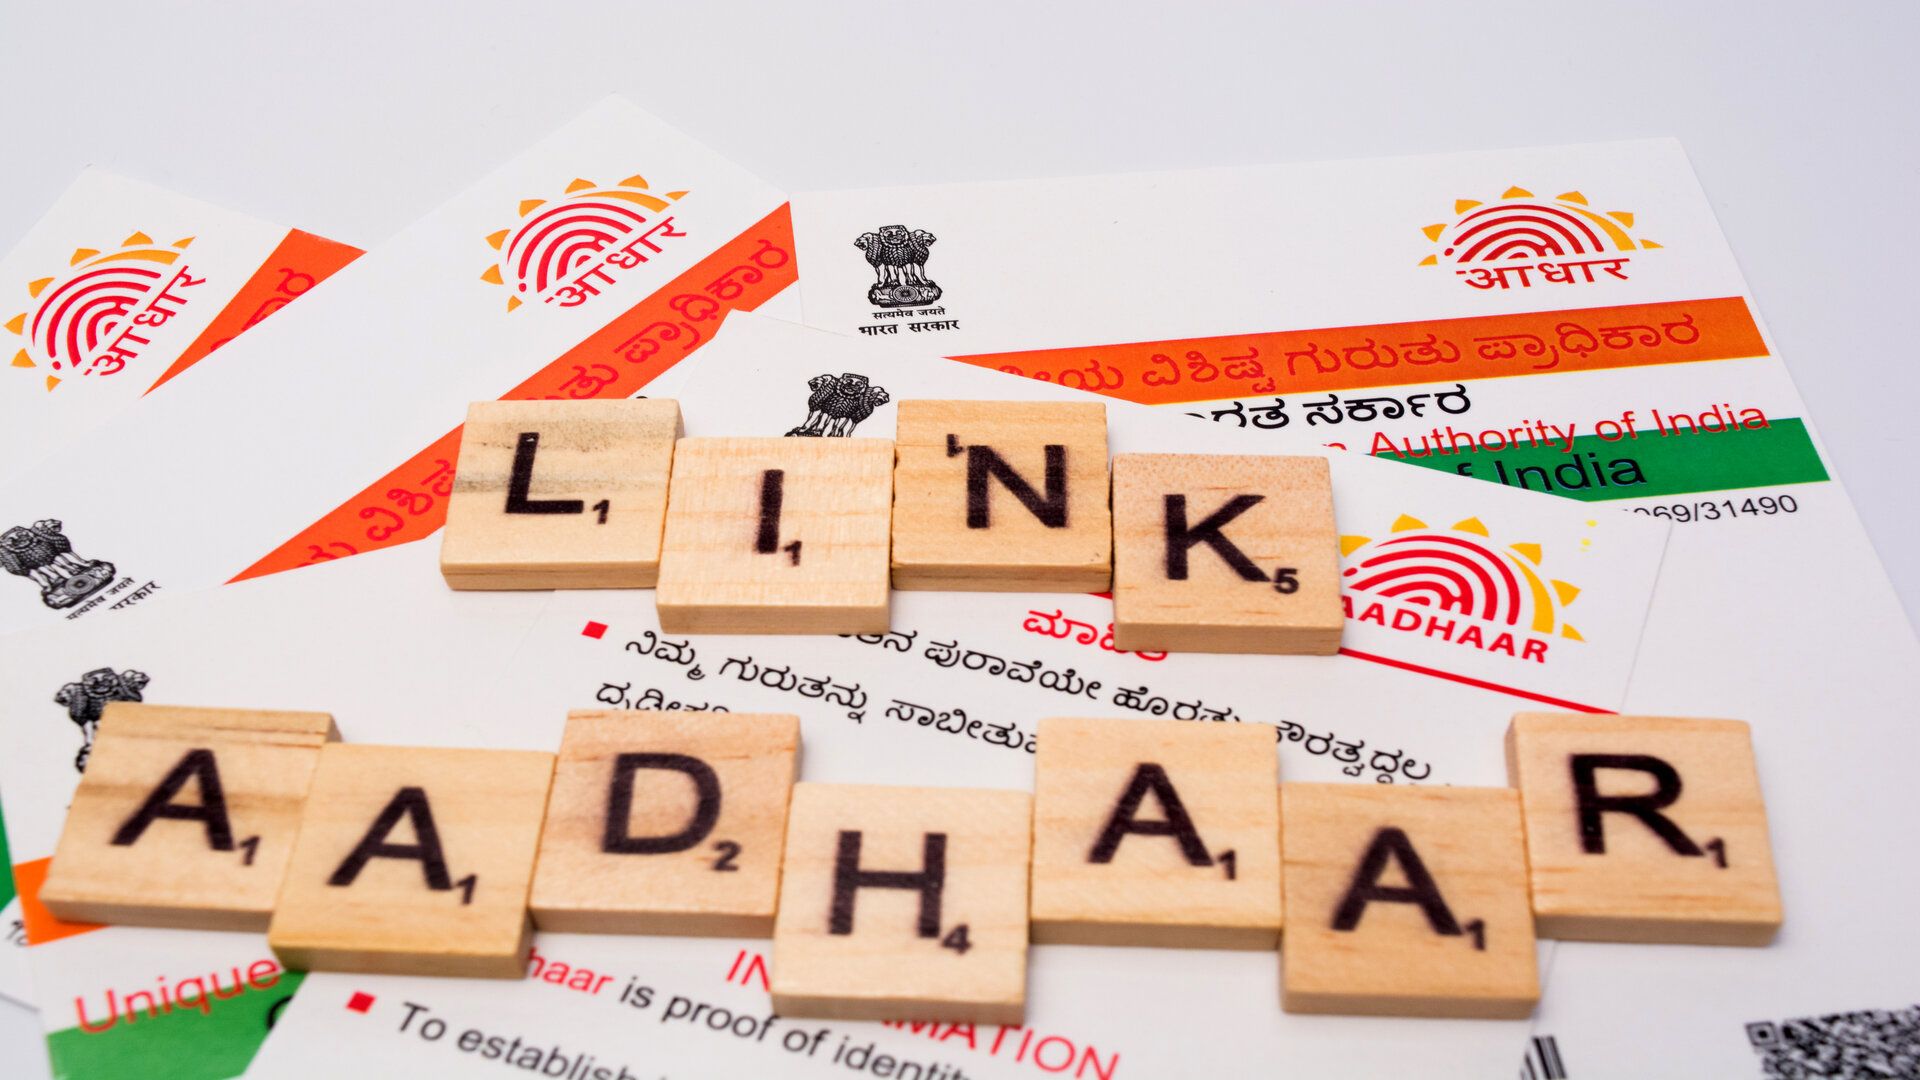 How to Link Your Aadhaar Card to a Bank Account